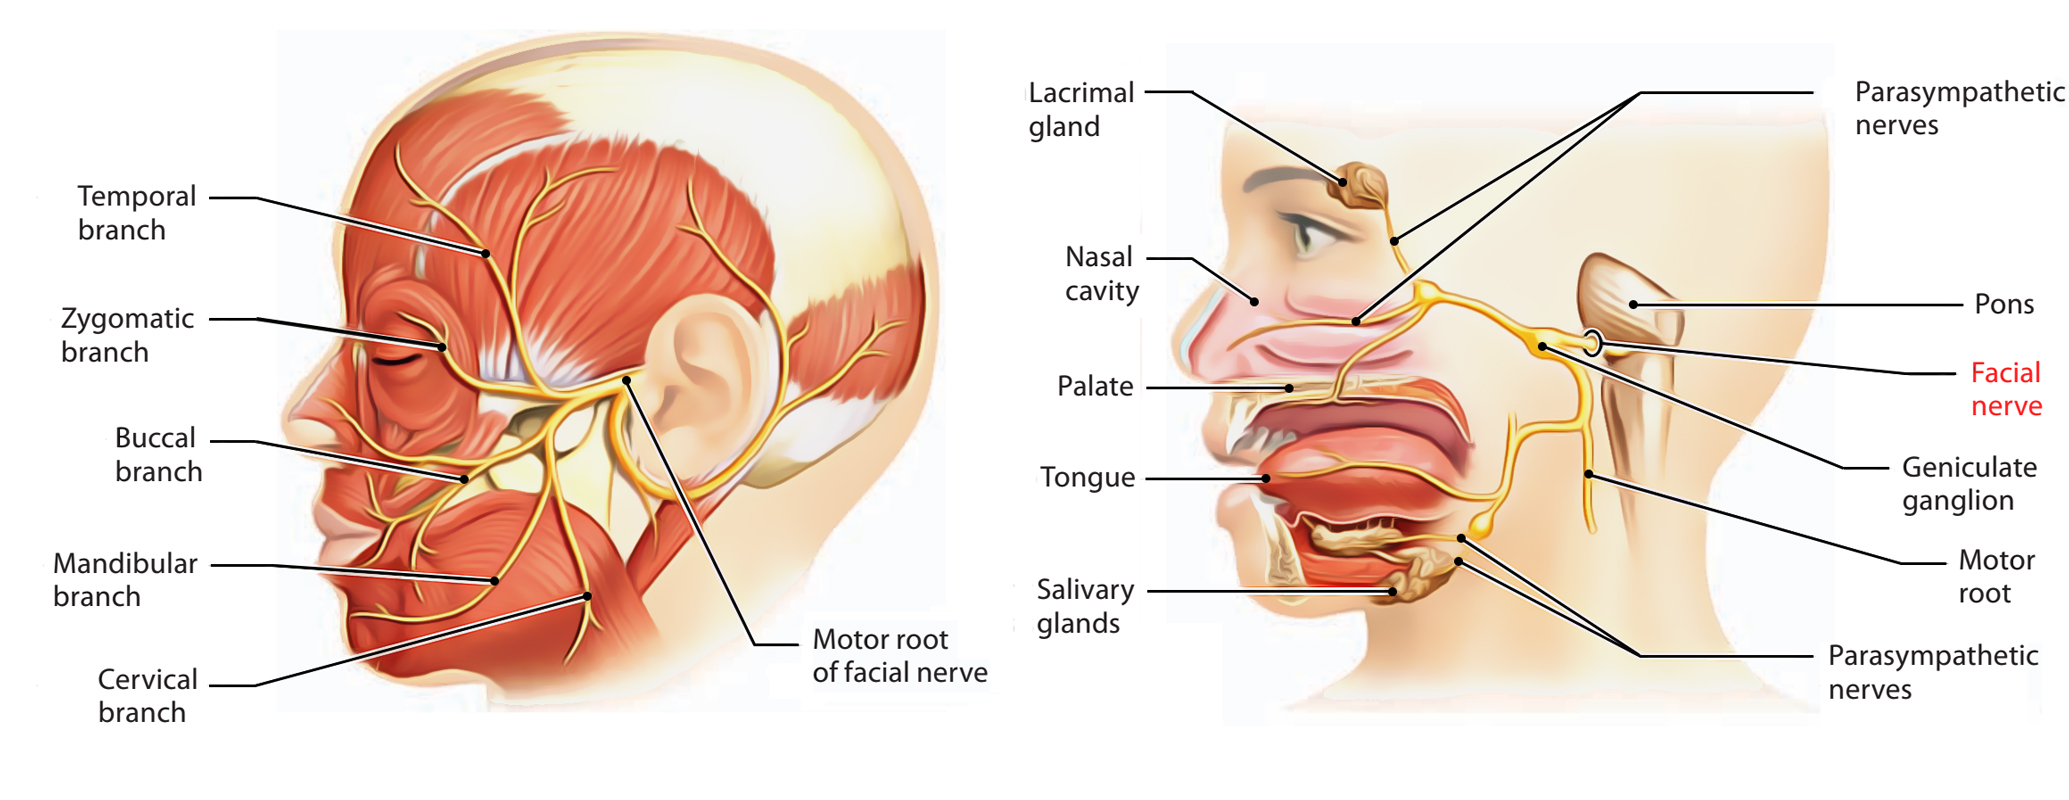 Facial Nerve - Anatomic Landmarks For Localization Of The Branches